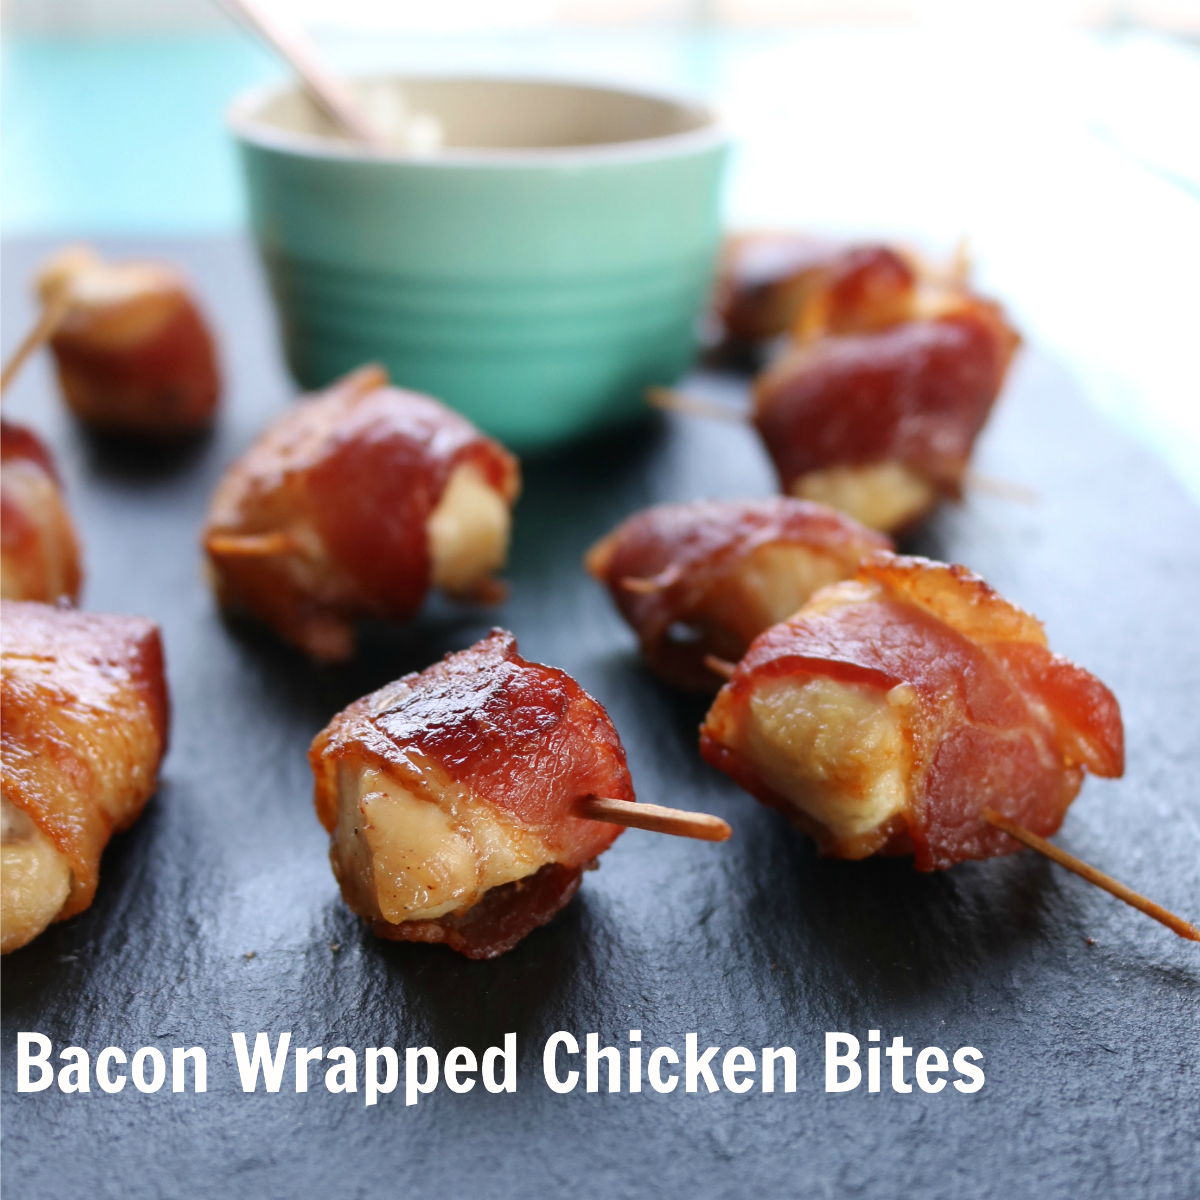 Bacon Wrapped Chicken Bites in Air Fryer